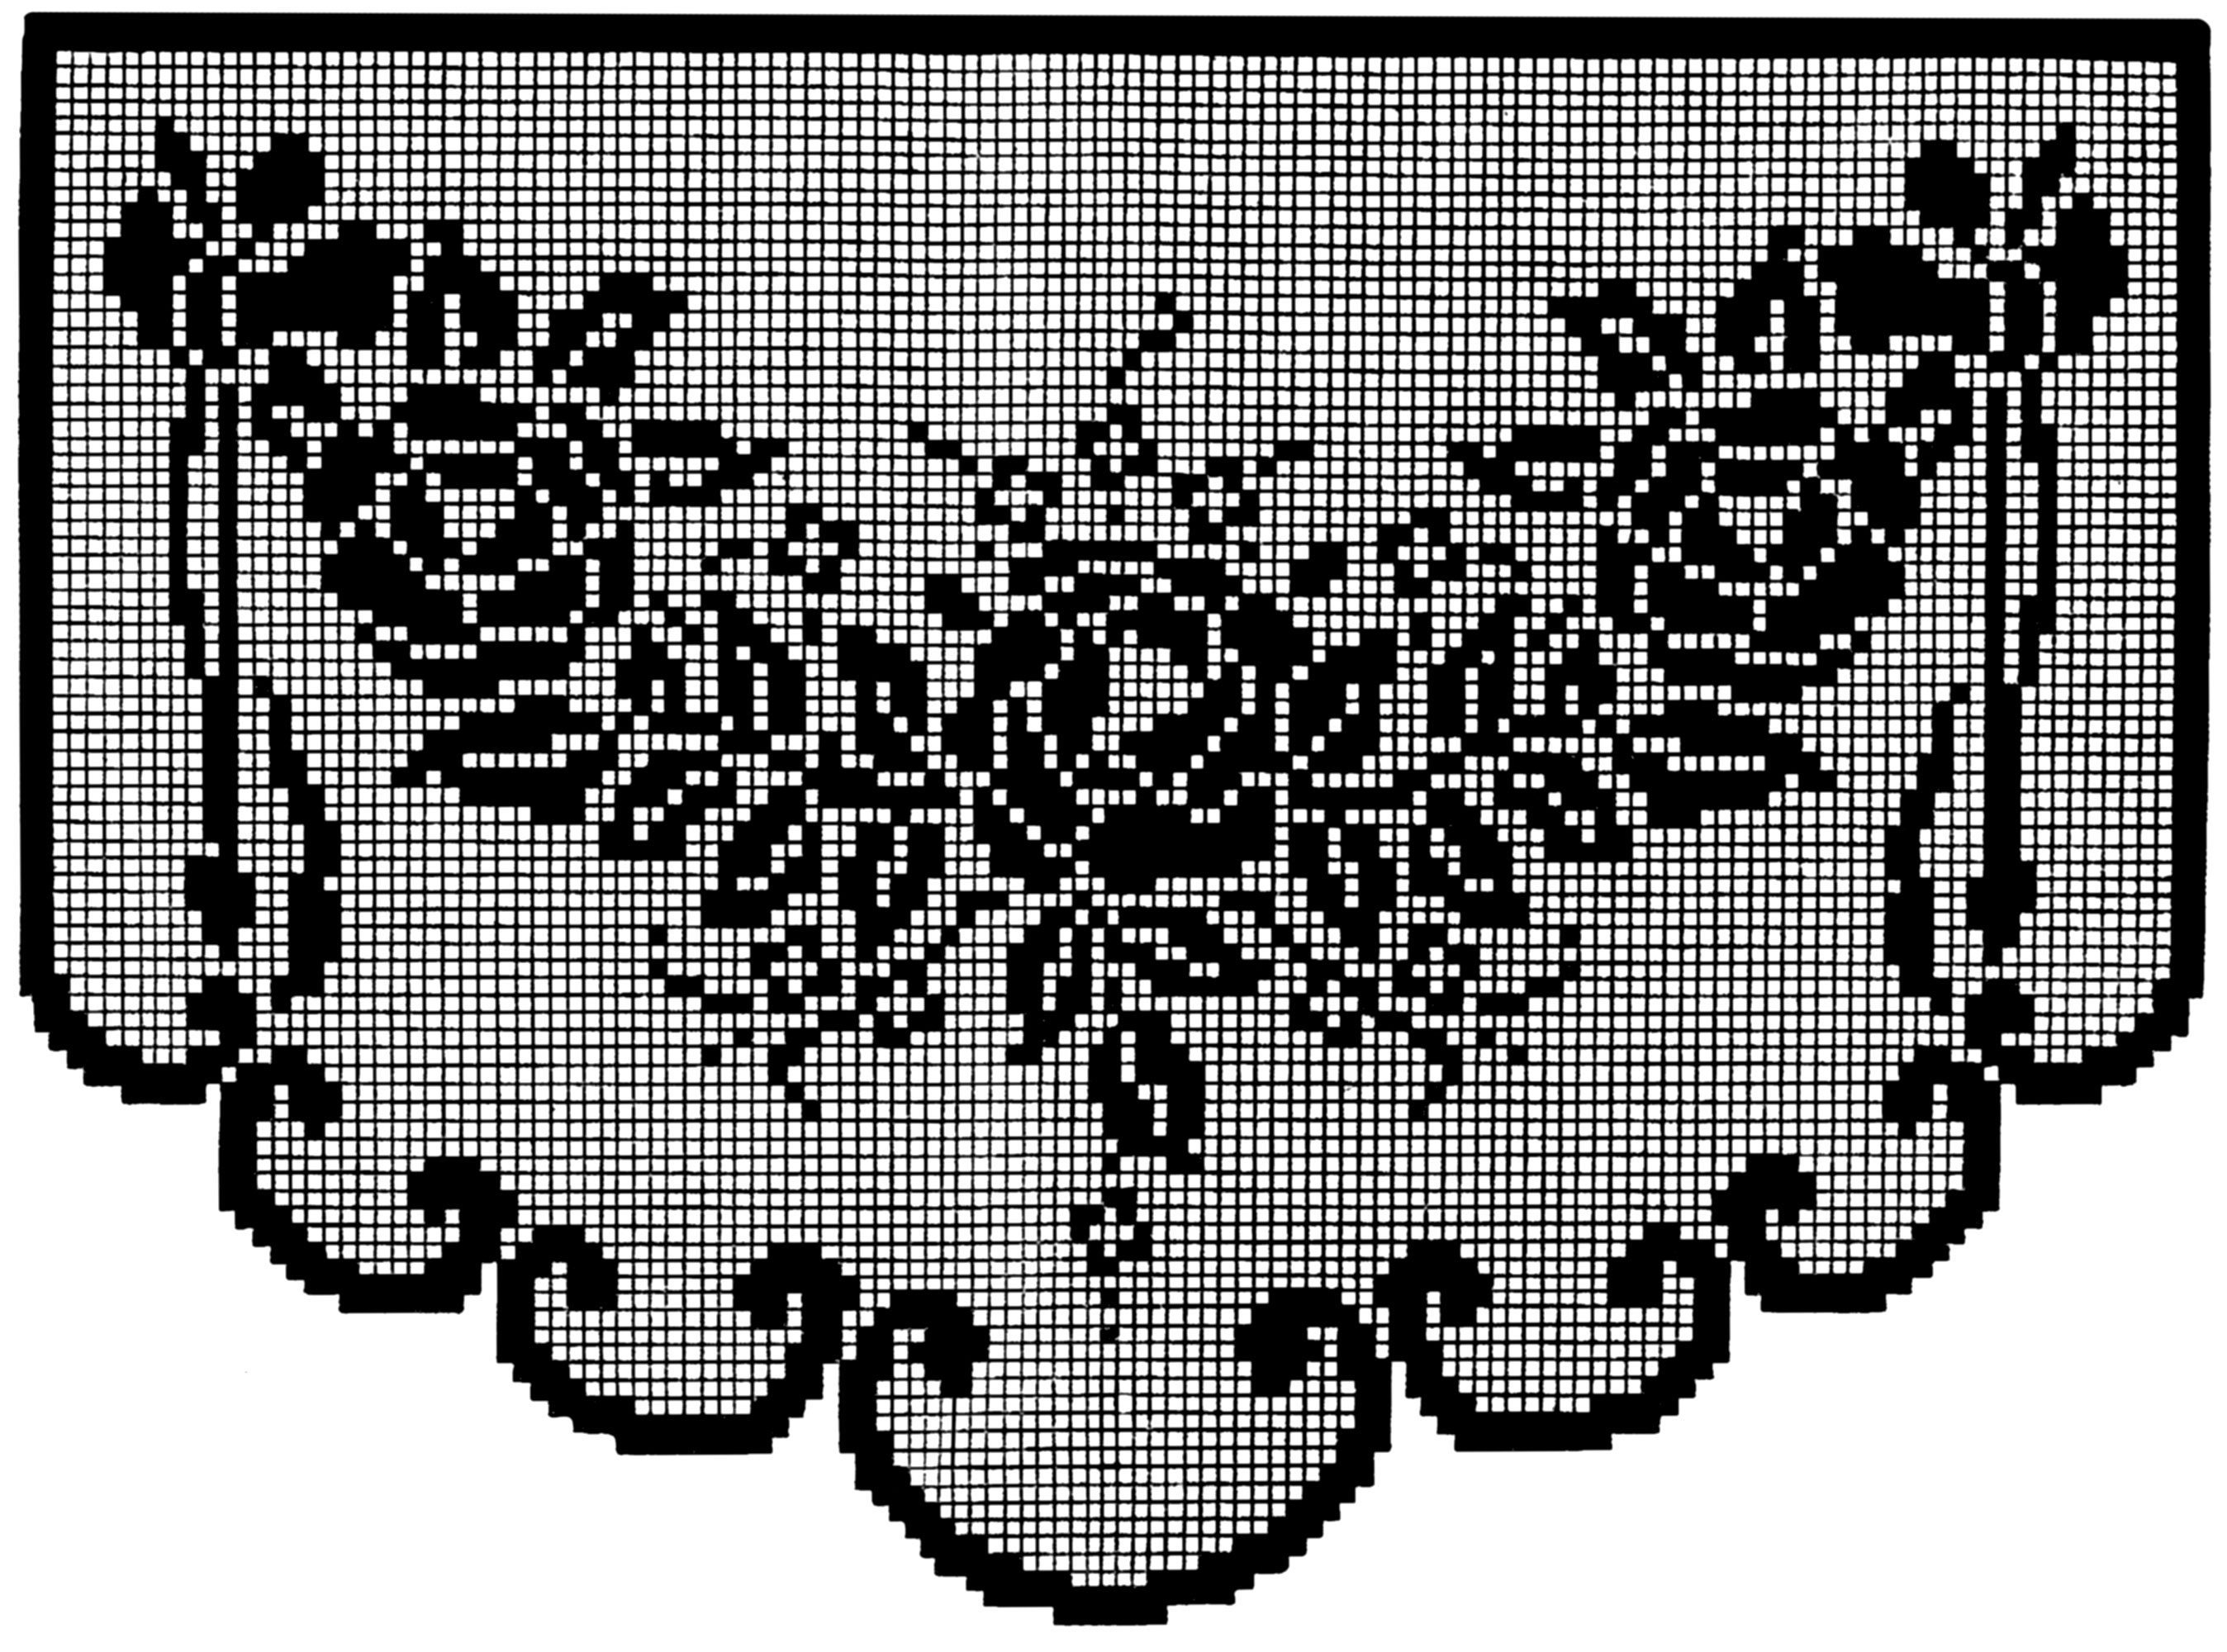 Christmas Filet Crochet Patterns Grid Patterns For Filet Crochet Or Cross Stitch 1923 Q Is For Quilter